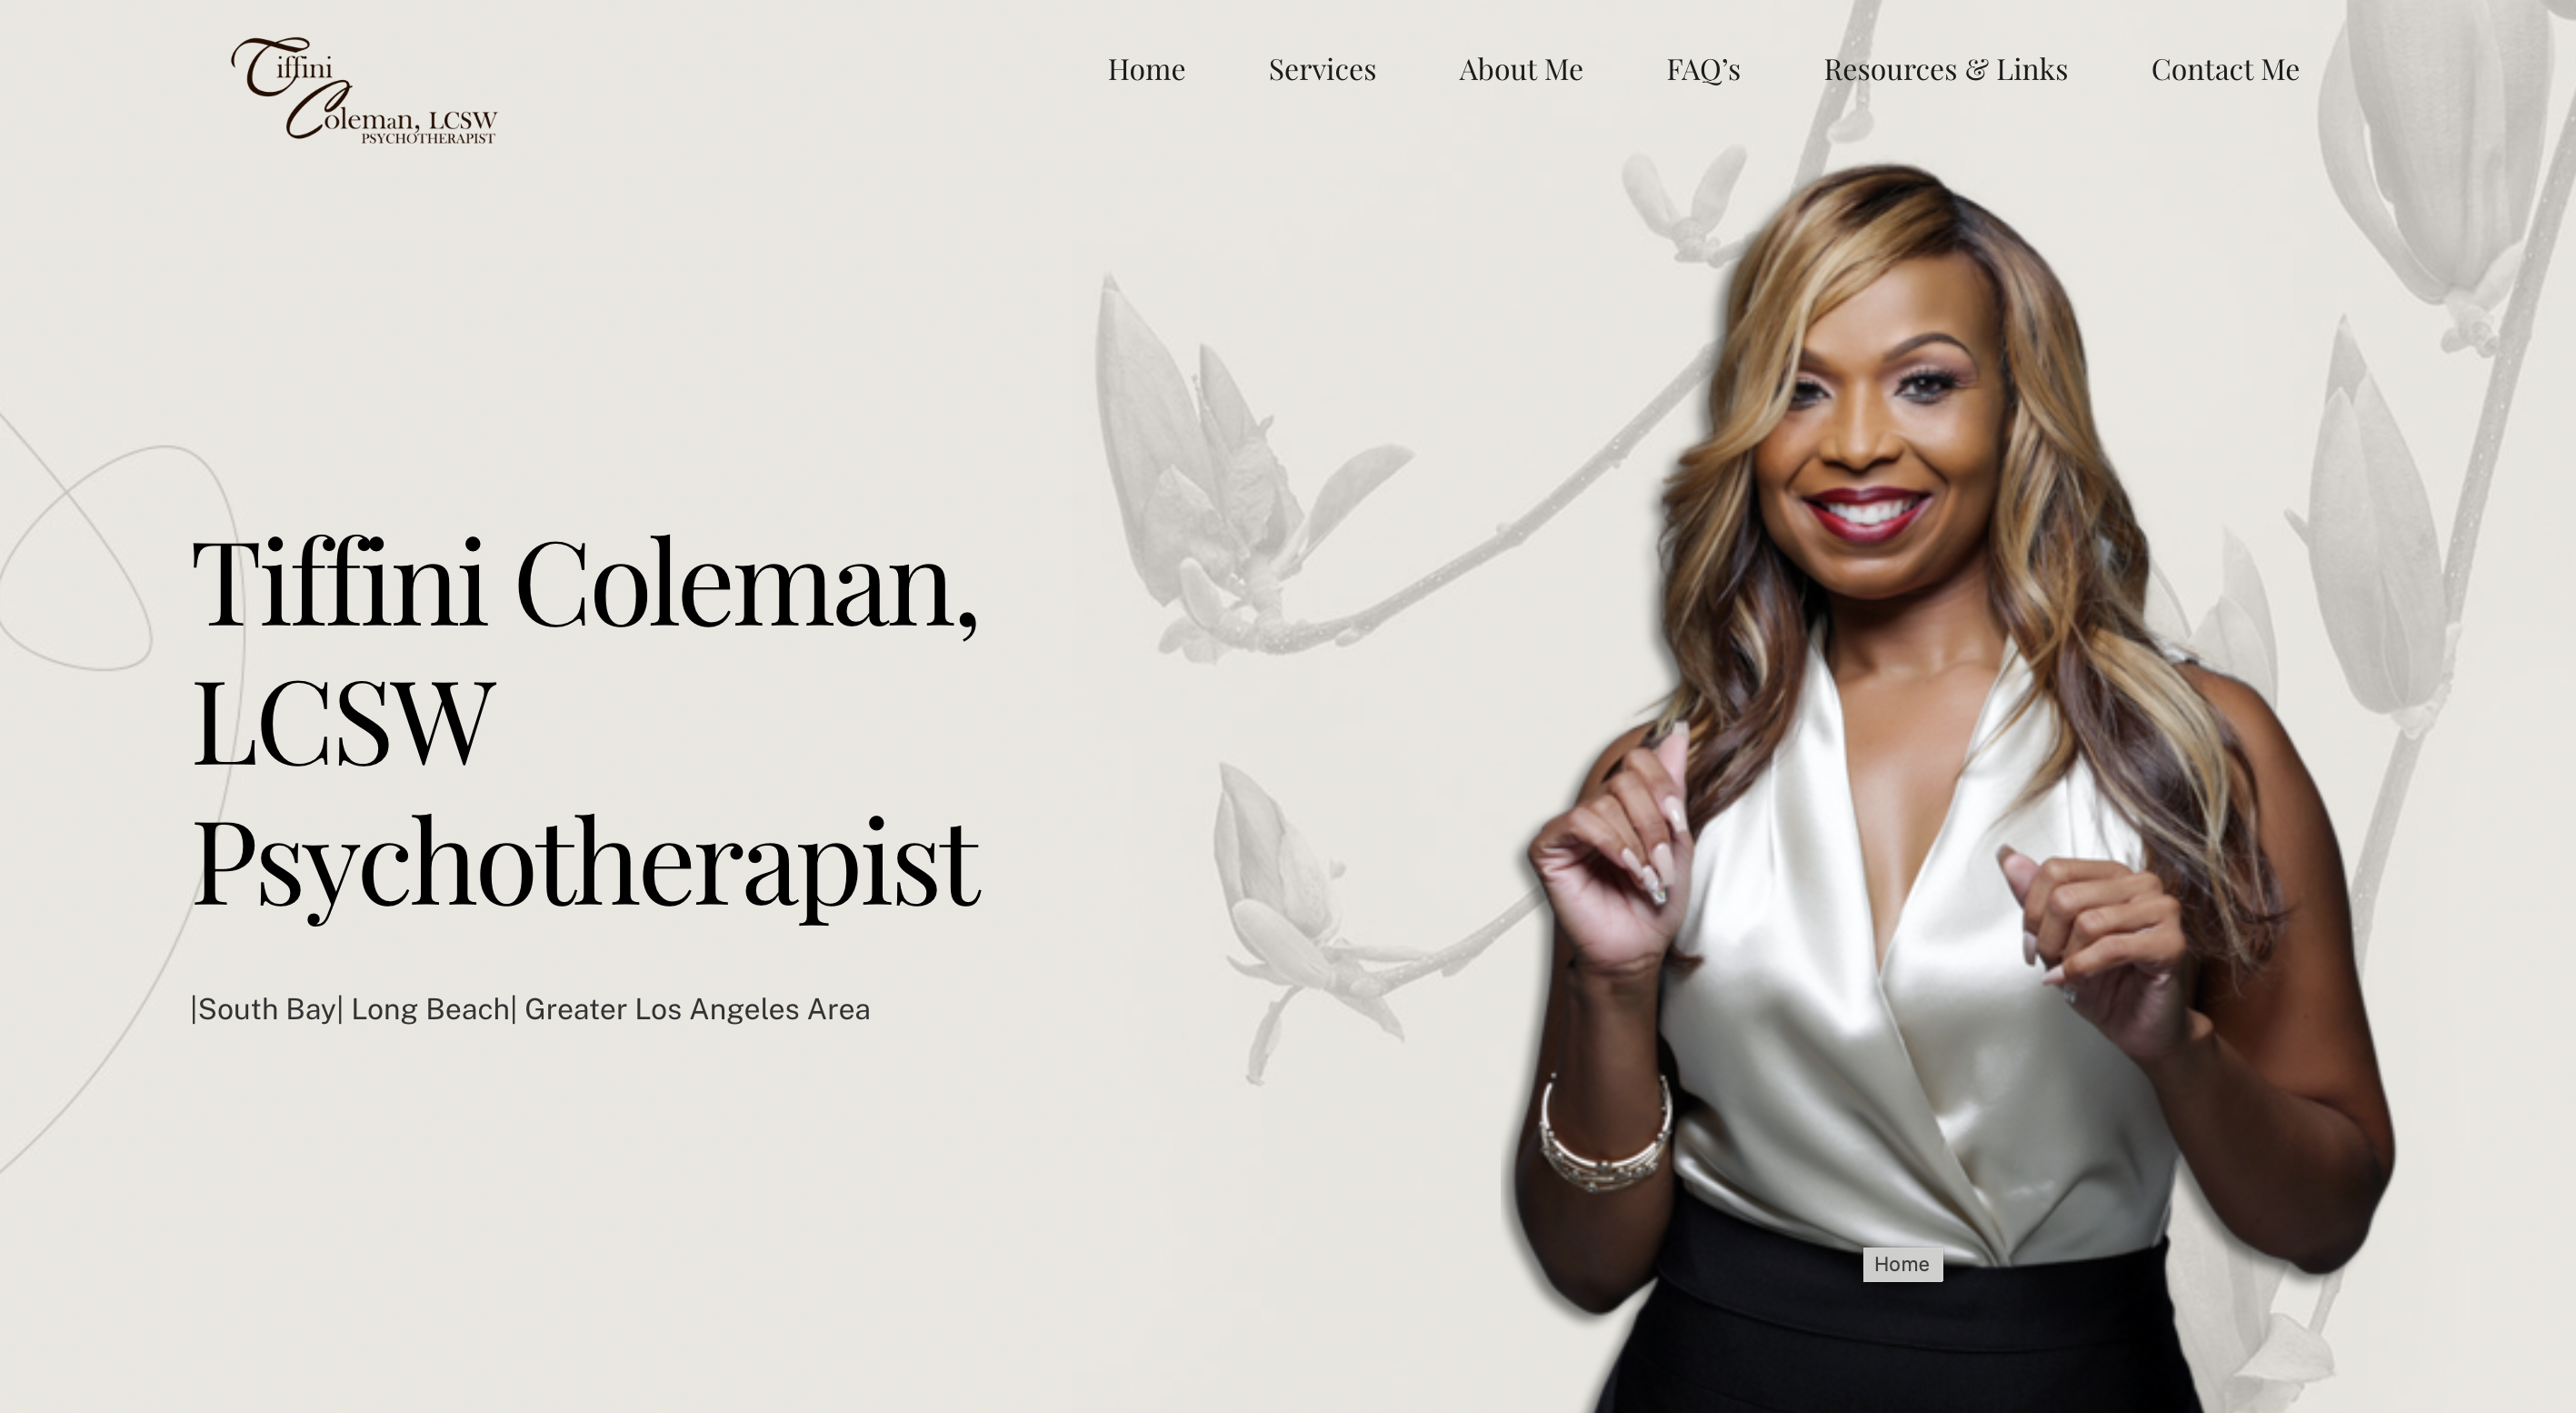 Dr. Tiffini Coleman is a notable Psychotherapist help clients nation wide.